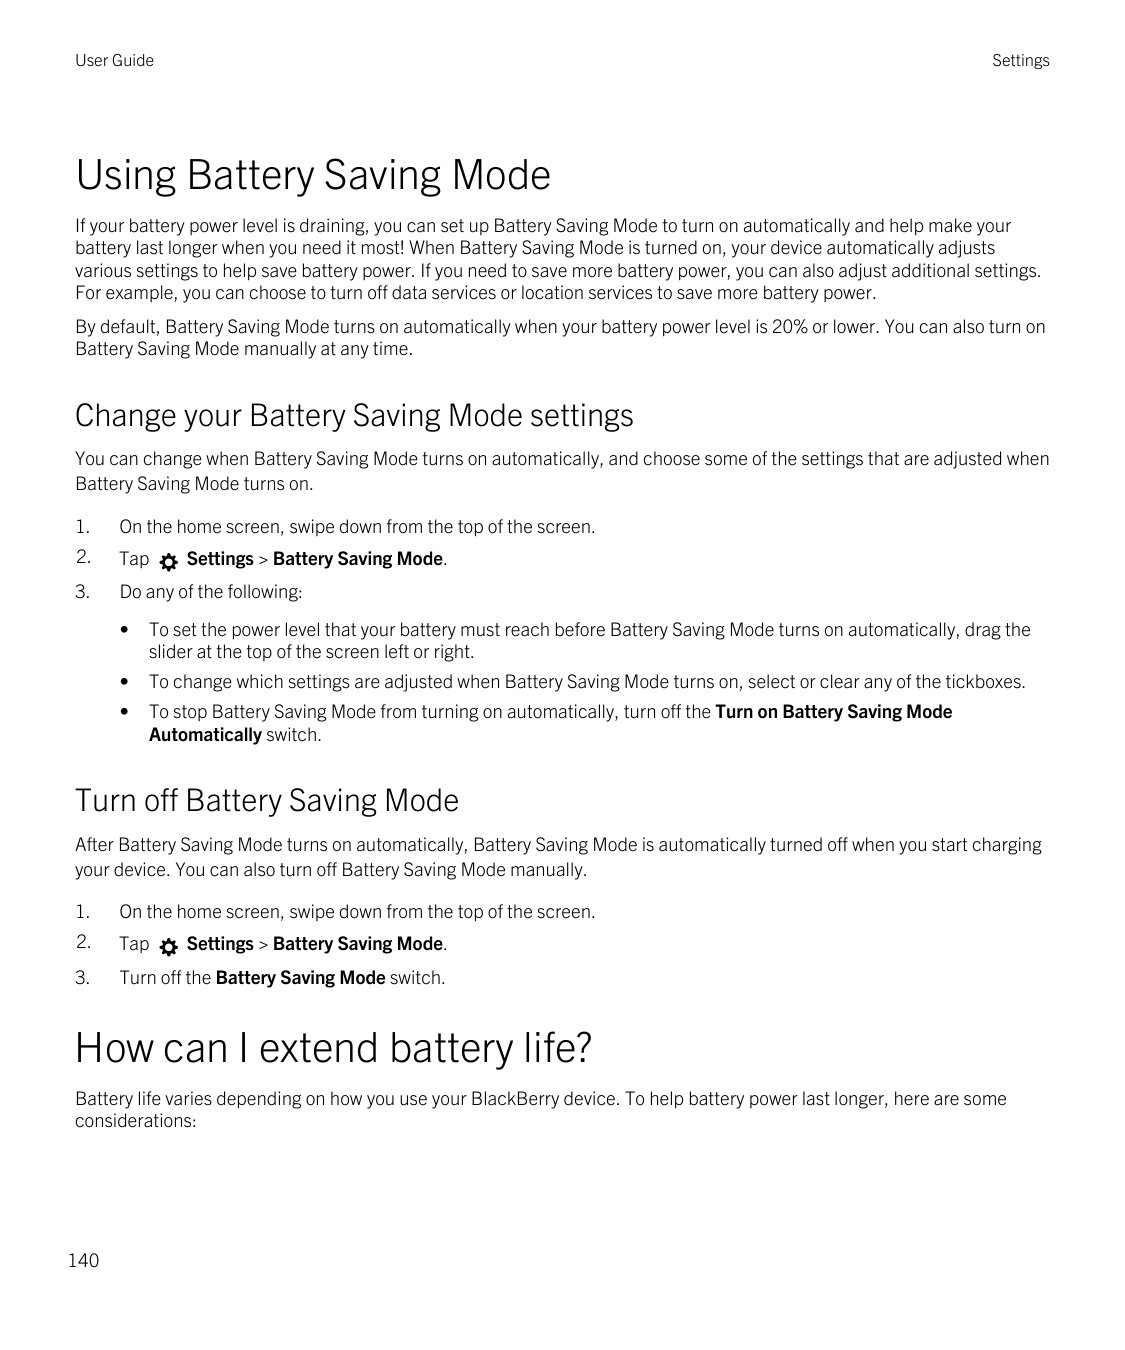 User GuideSettingsUsing Battery Saving ModeIf your battery power level is draining, you can set up Battery Saving Mode to turn o